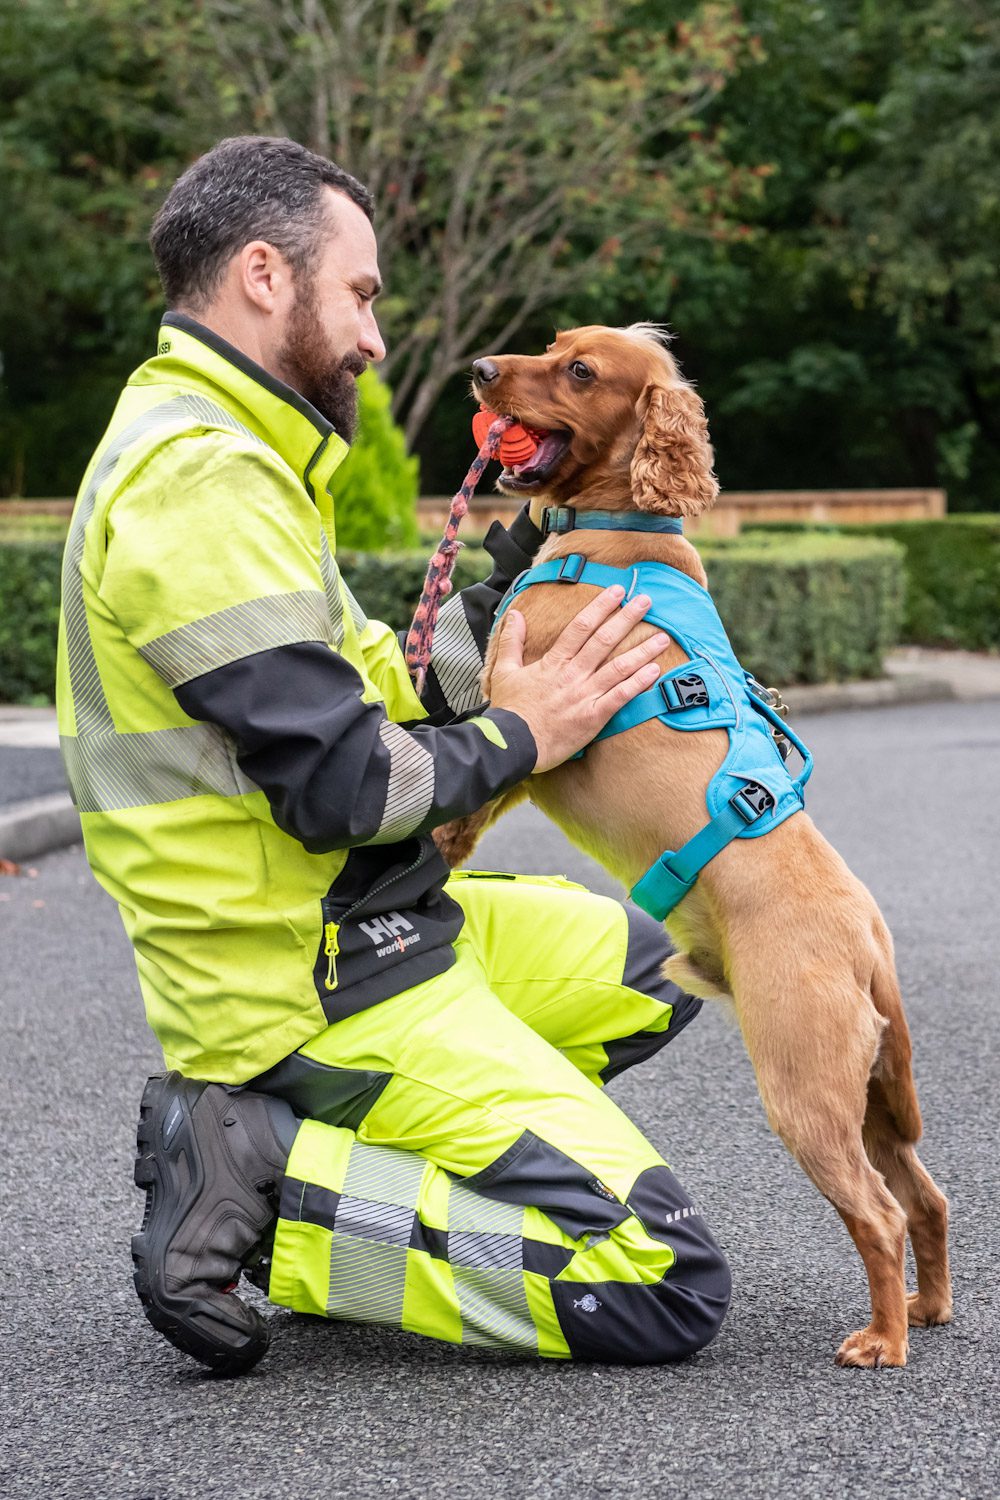 detection dog playing with a ball with his handler who is kneeling on the ground